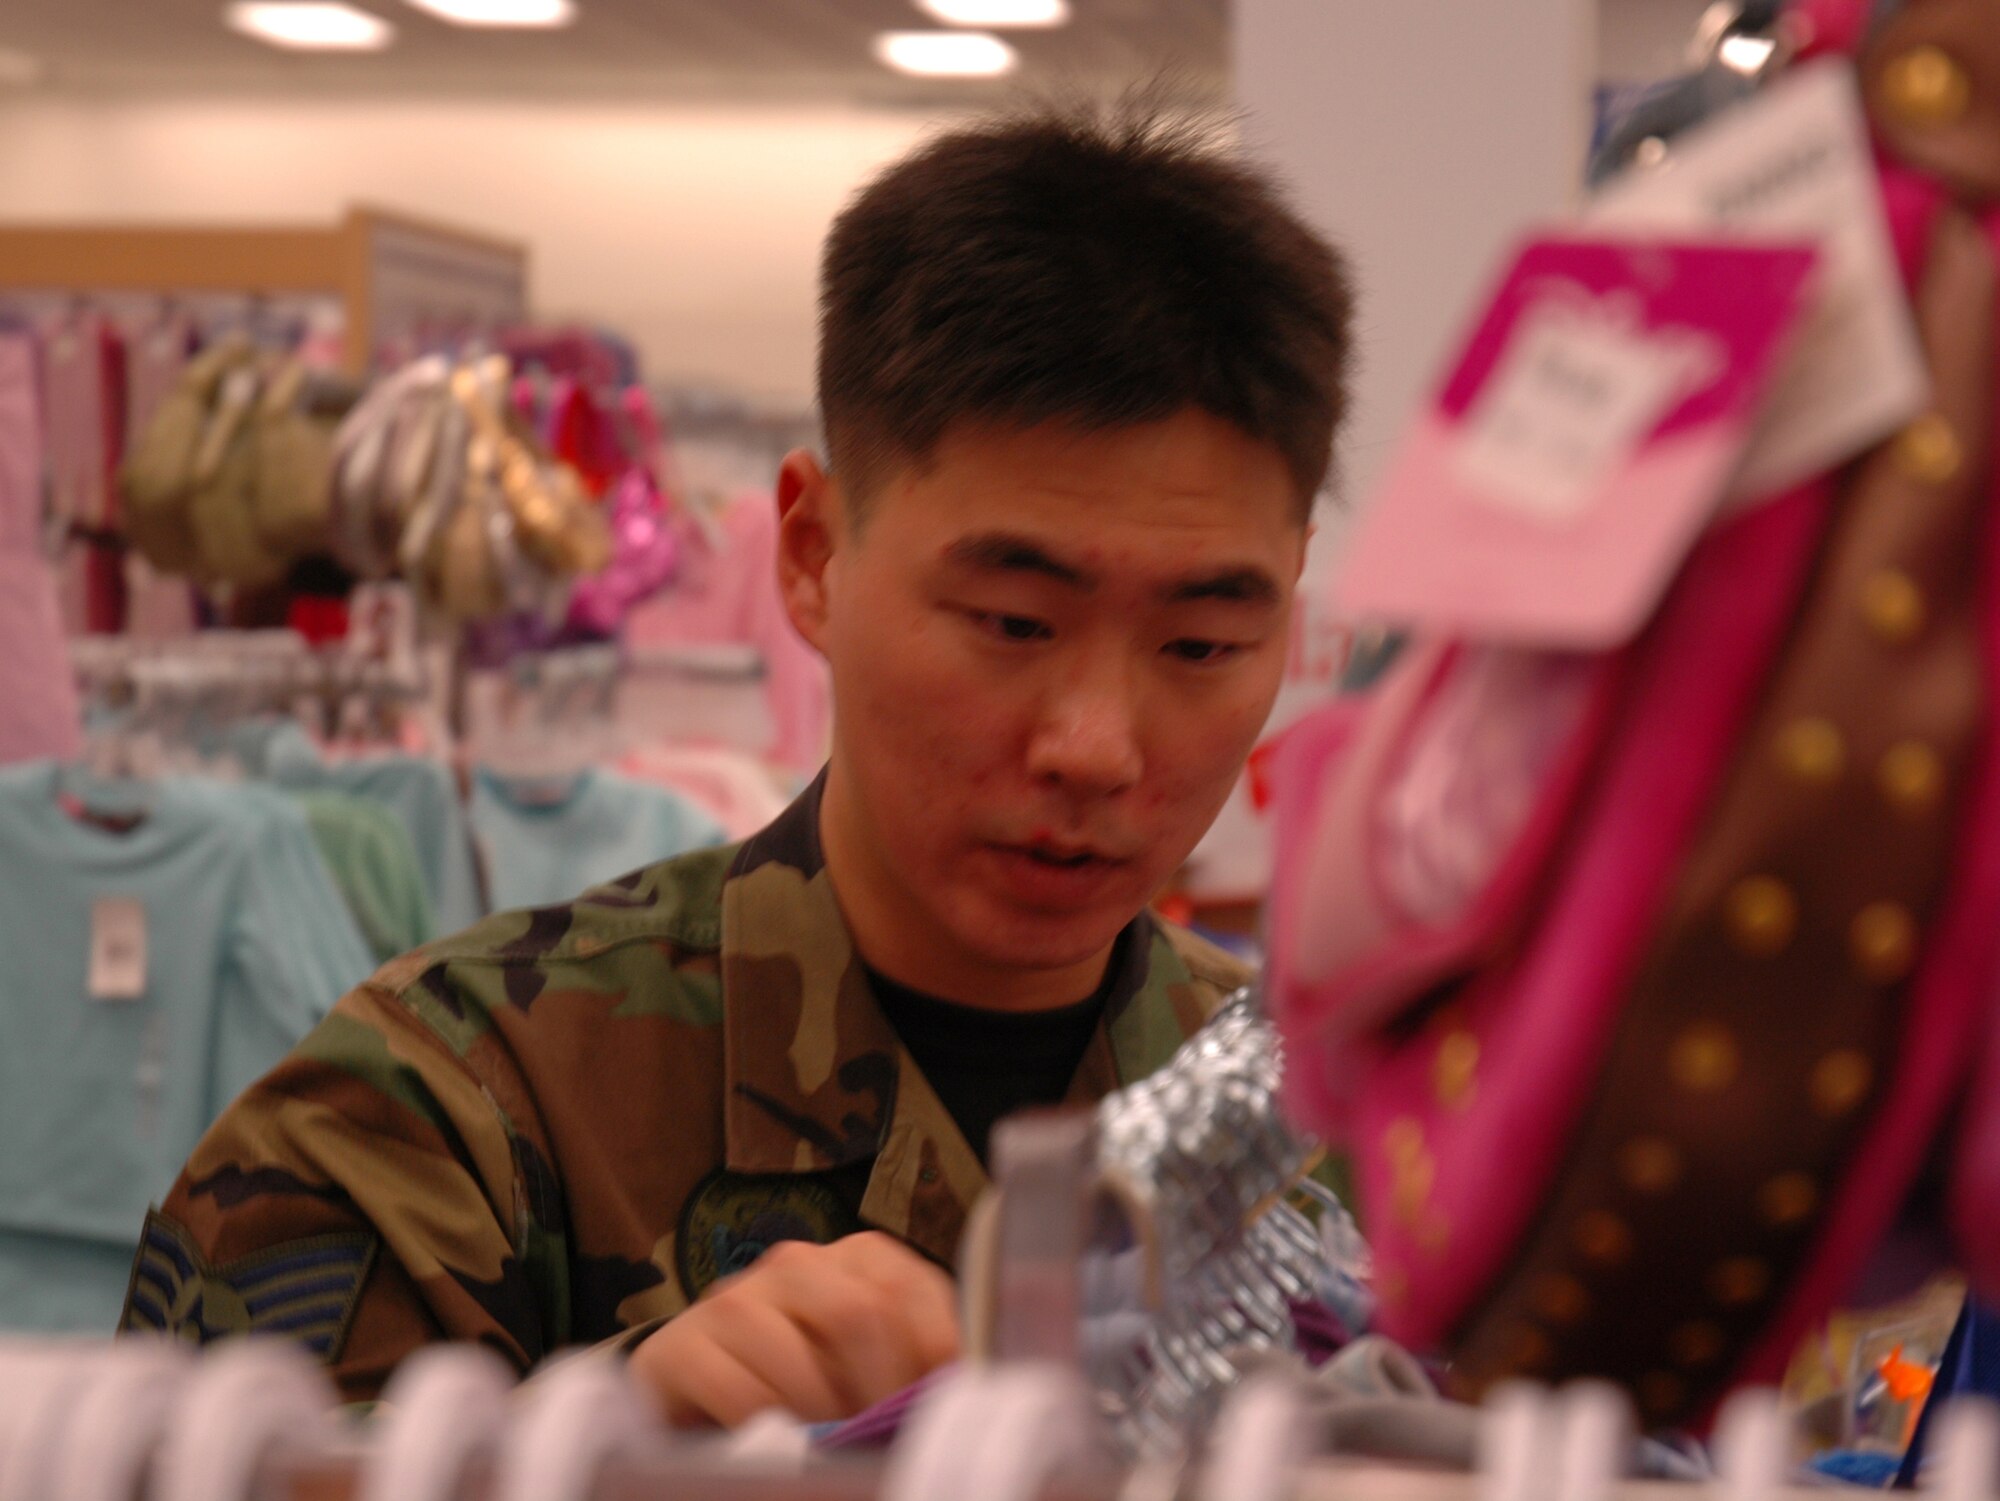 BUCKLEY AIR FORCE BASE, Colo. -- Staff Sgt. Hyun Yang, 460th Civil Engineer Squadron, shops for clothes as part of a shopping spree for the Angel Tree at the Buckley Exchange Dec. 6. Team Buckley first sergeants and other volunteers spent approximately $4,600 donated by the Homefront Heroes Denver chapter, a non-profit military support group. The Angel Tree project provides family members of all services', E-5's and below, gifts for the holidays. (U.S. Air Force photo by Staff Sgt. Sanjay Allen)